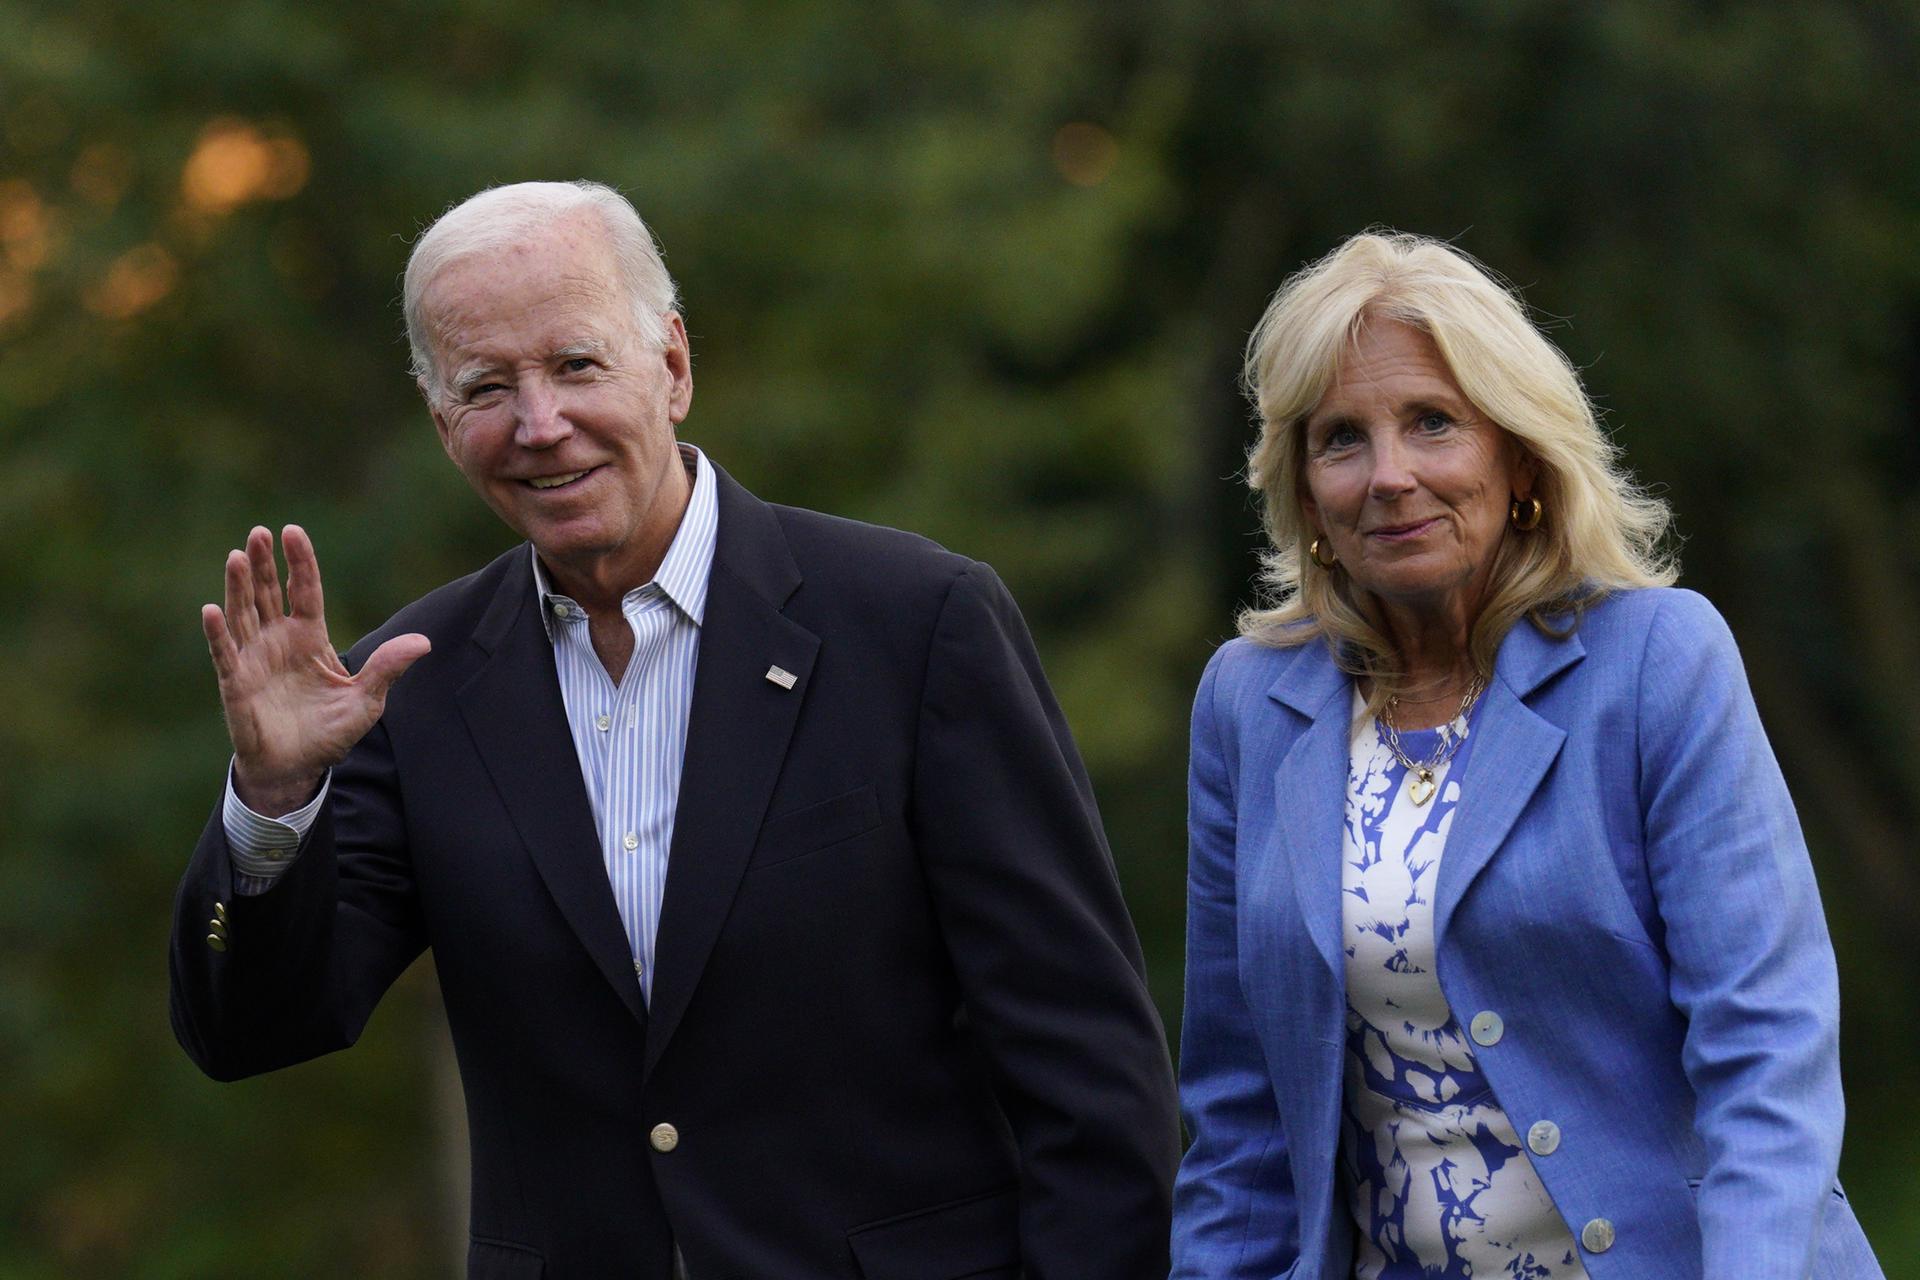 US President Joe Biden and First lady Jill Biden arrive on the South Lawn of the White House upon his return to Washington, DC, USA, 26 August 2023, after a vacation in Nevada. EFE-EPA/Yuri Gripas/POOL